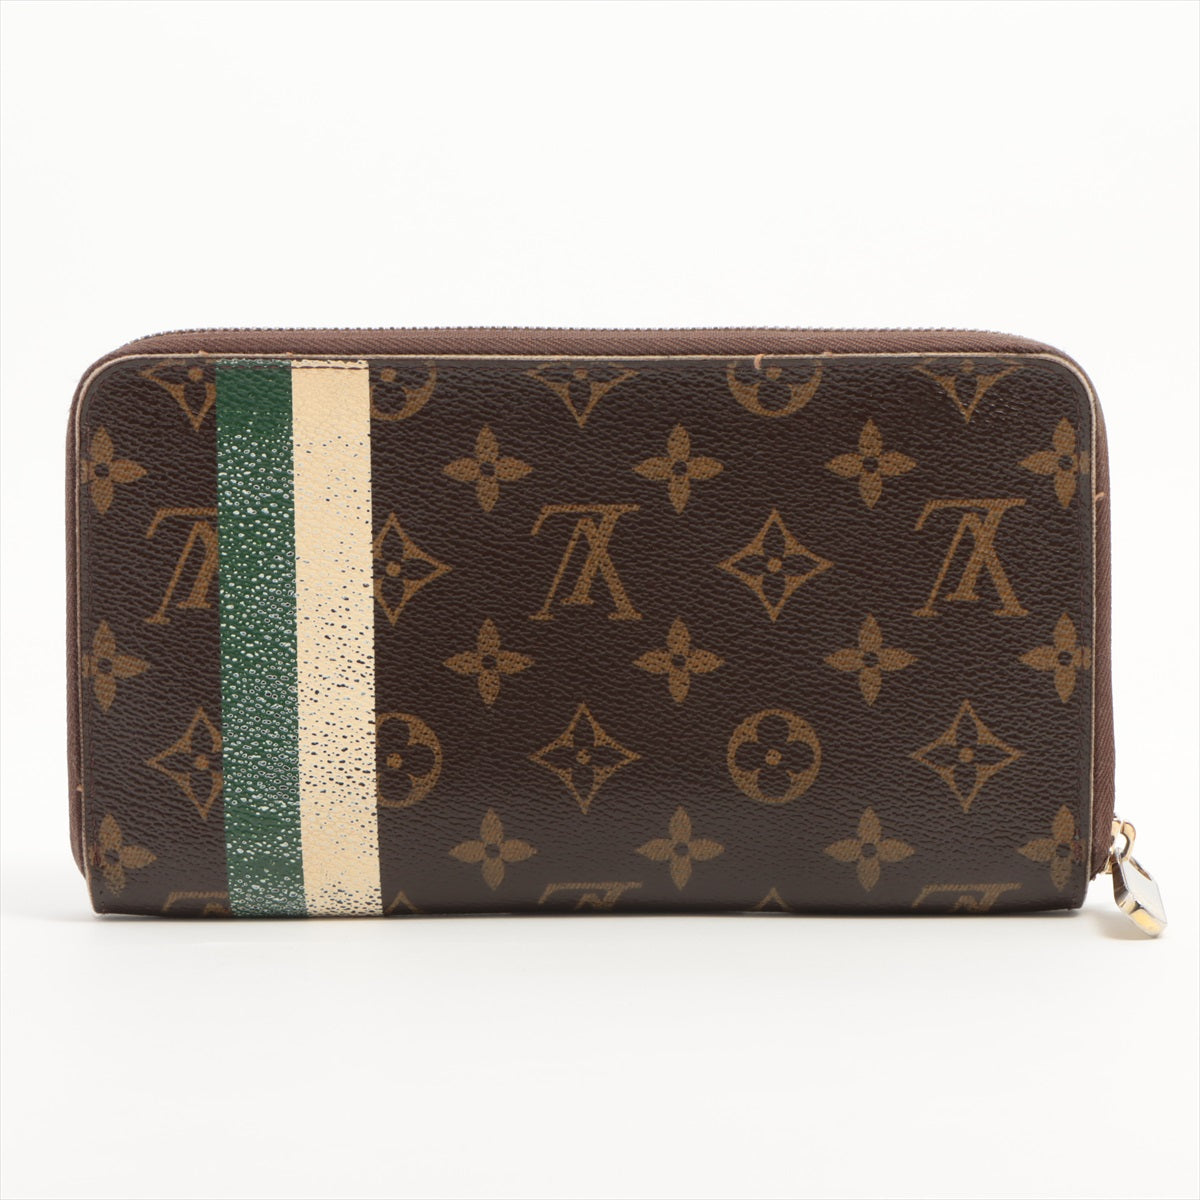 Limied Edition ! Louis Vuitton Monogram Canvas M60035 Green / White Groom  Zippy Organizer Wallet - The Attic Place